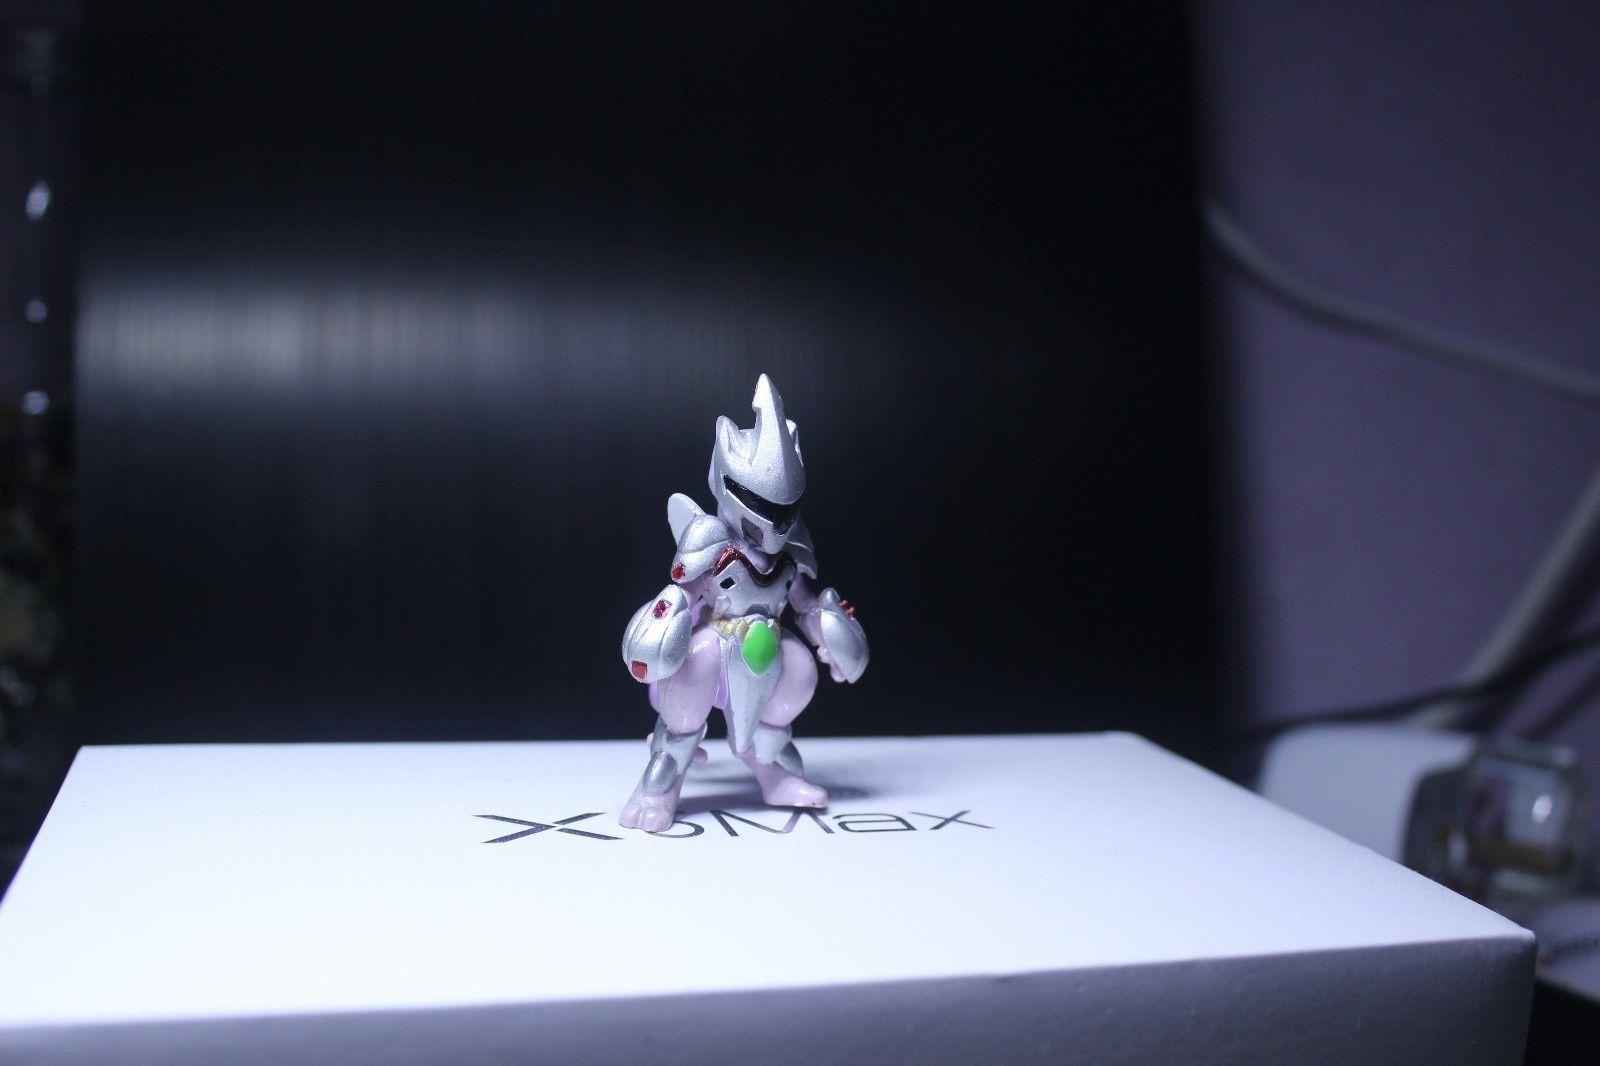 Armored mewtwo from tomy Ultra Rare High end collectible toy. HOLY